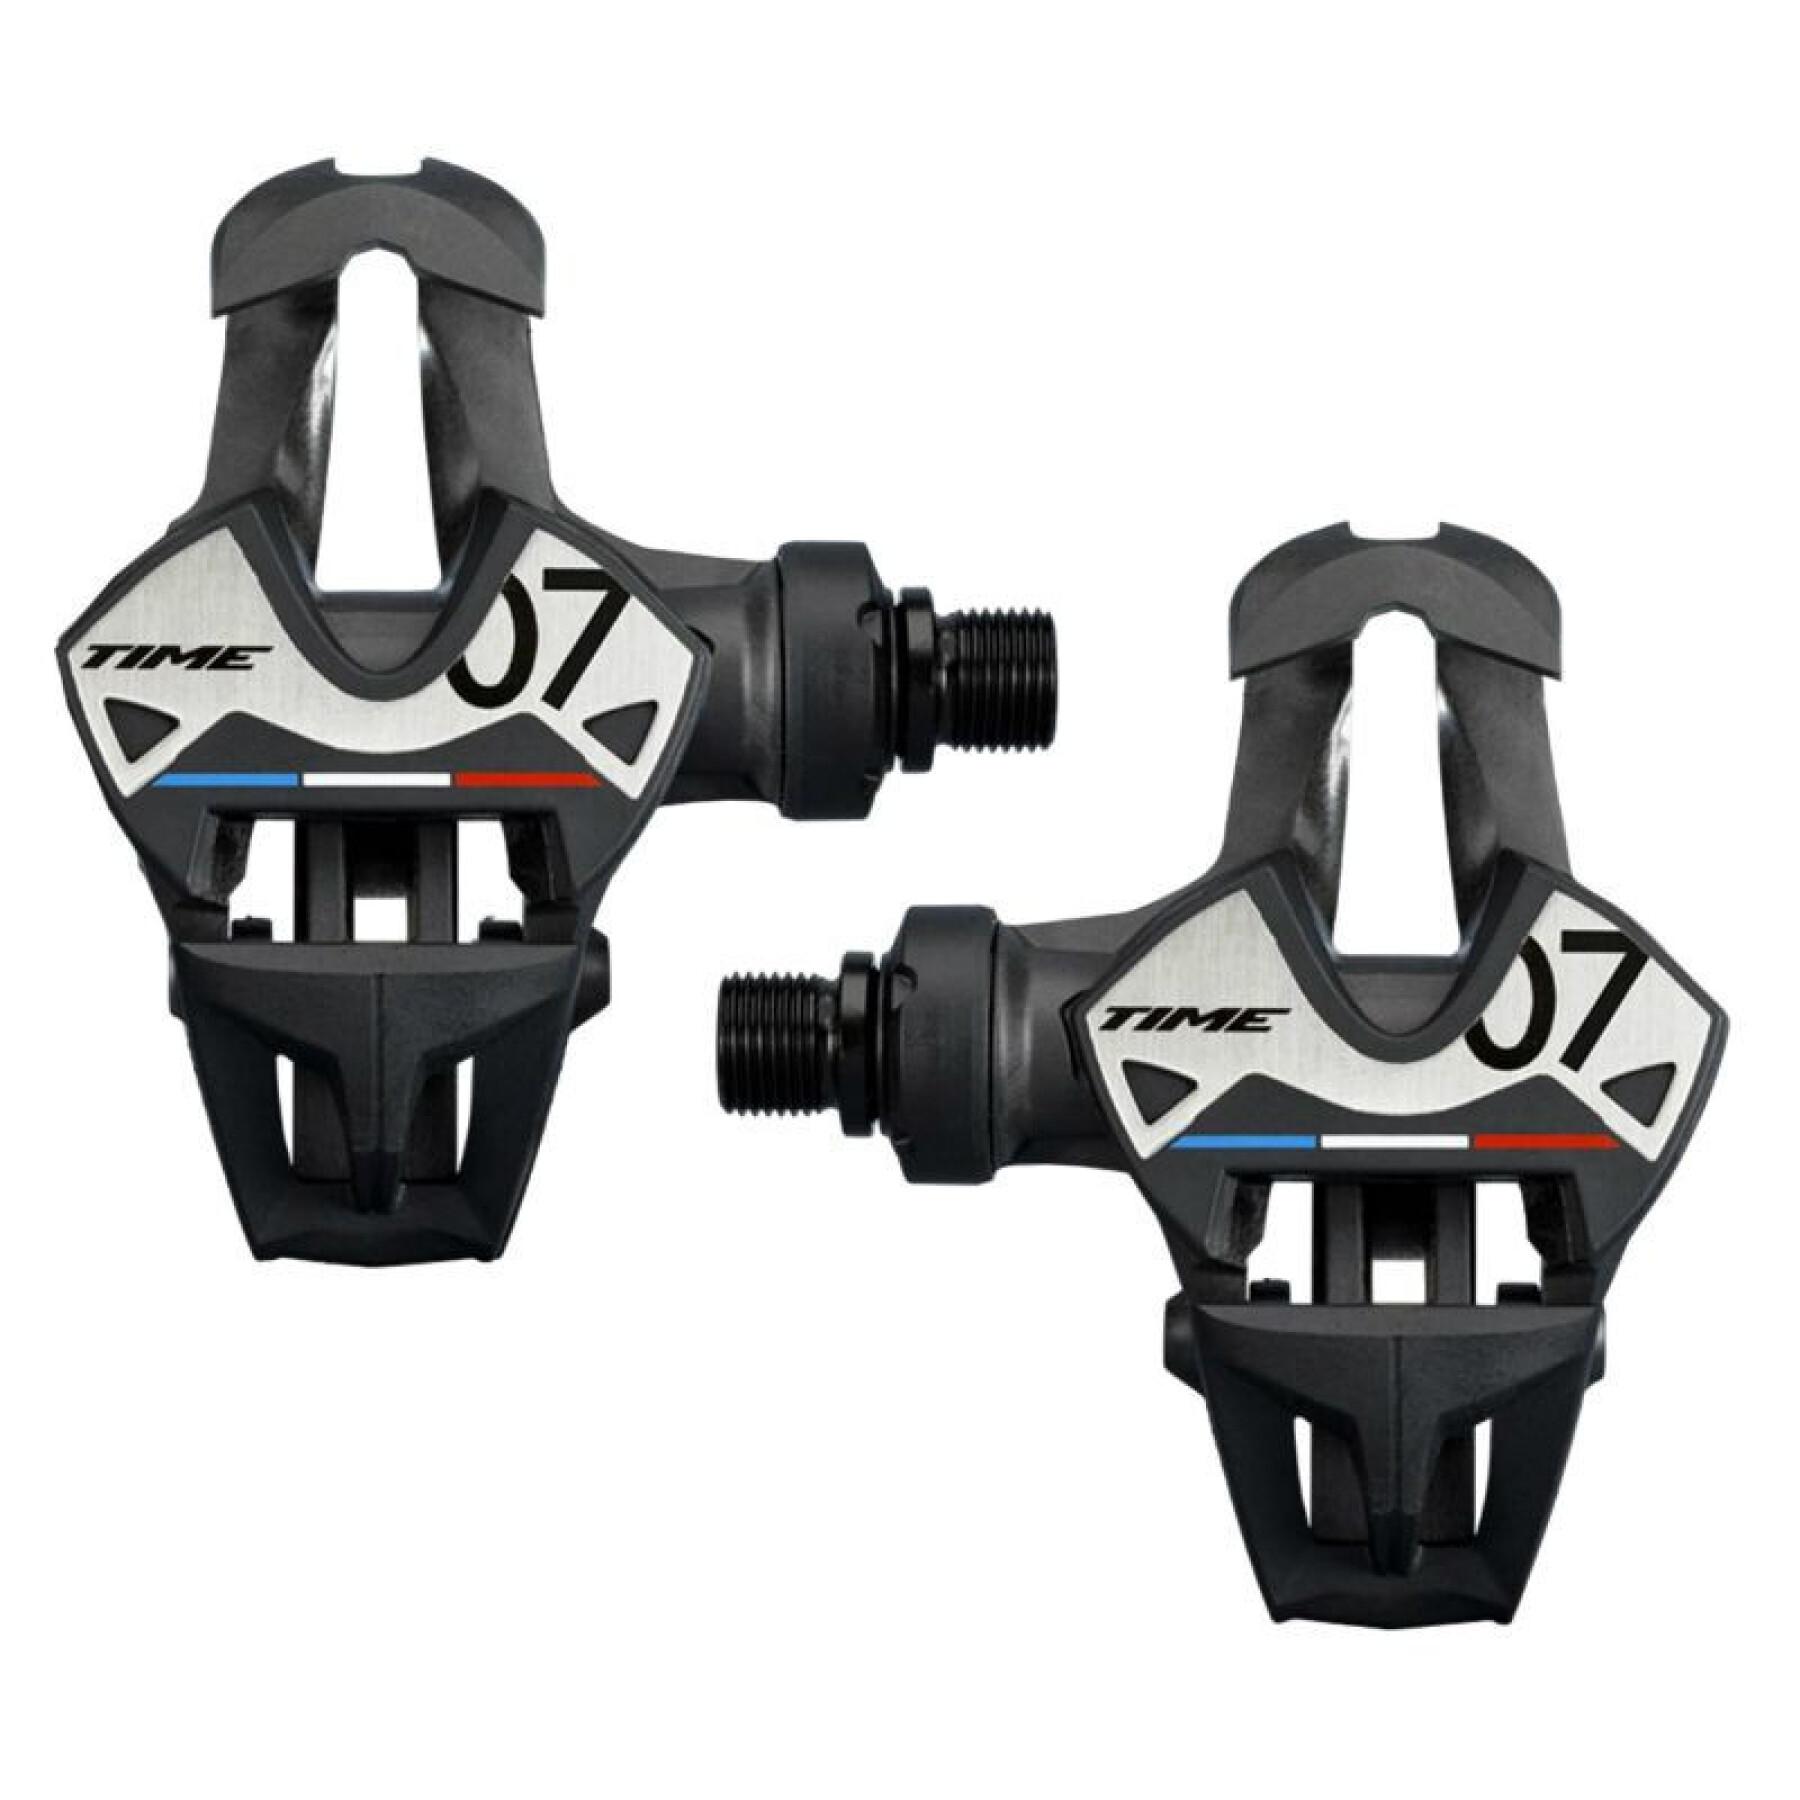 Automatic road pedals with wedges TIME X-PRESSO 7 I-CLIC